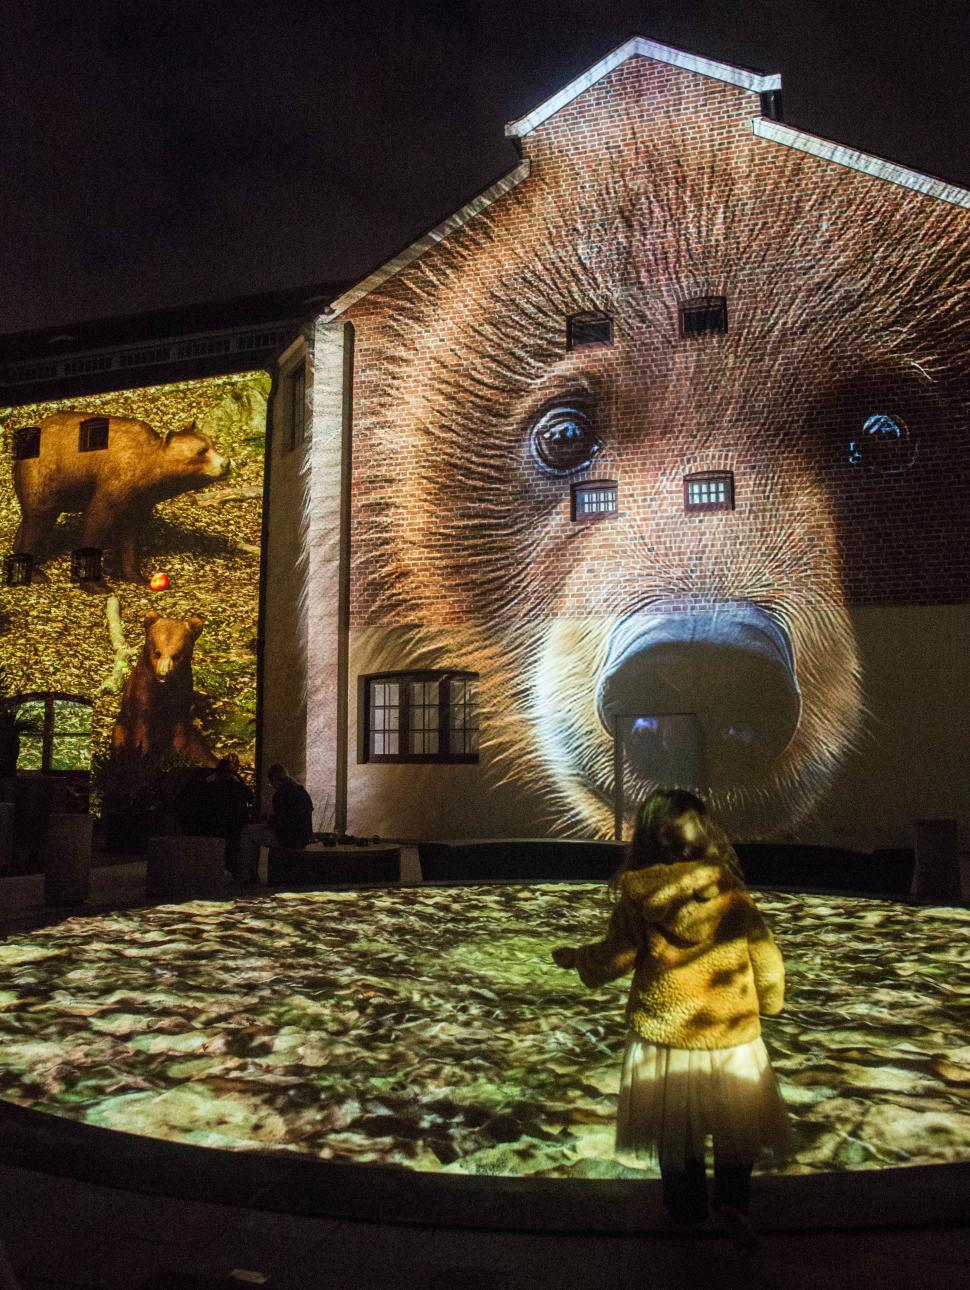 A Marsican brown bear projected onto the Old Gaol